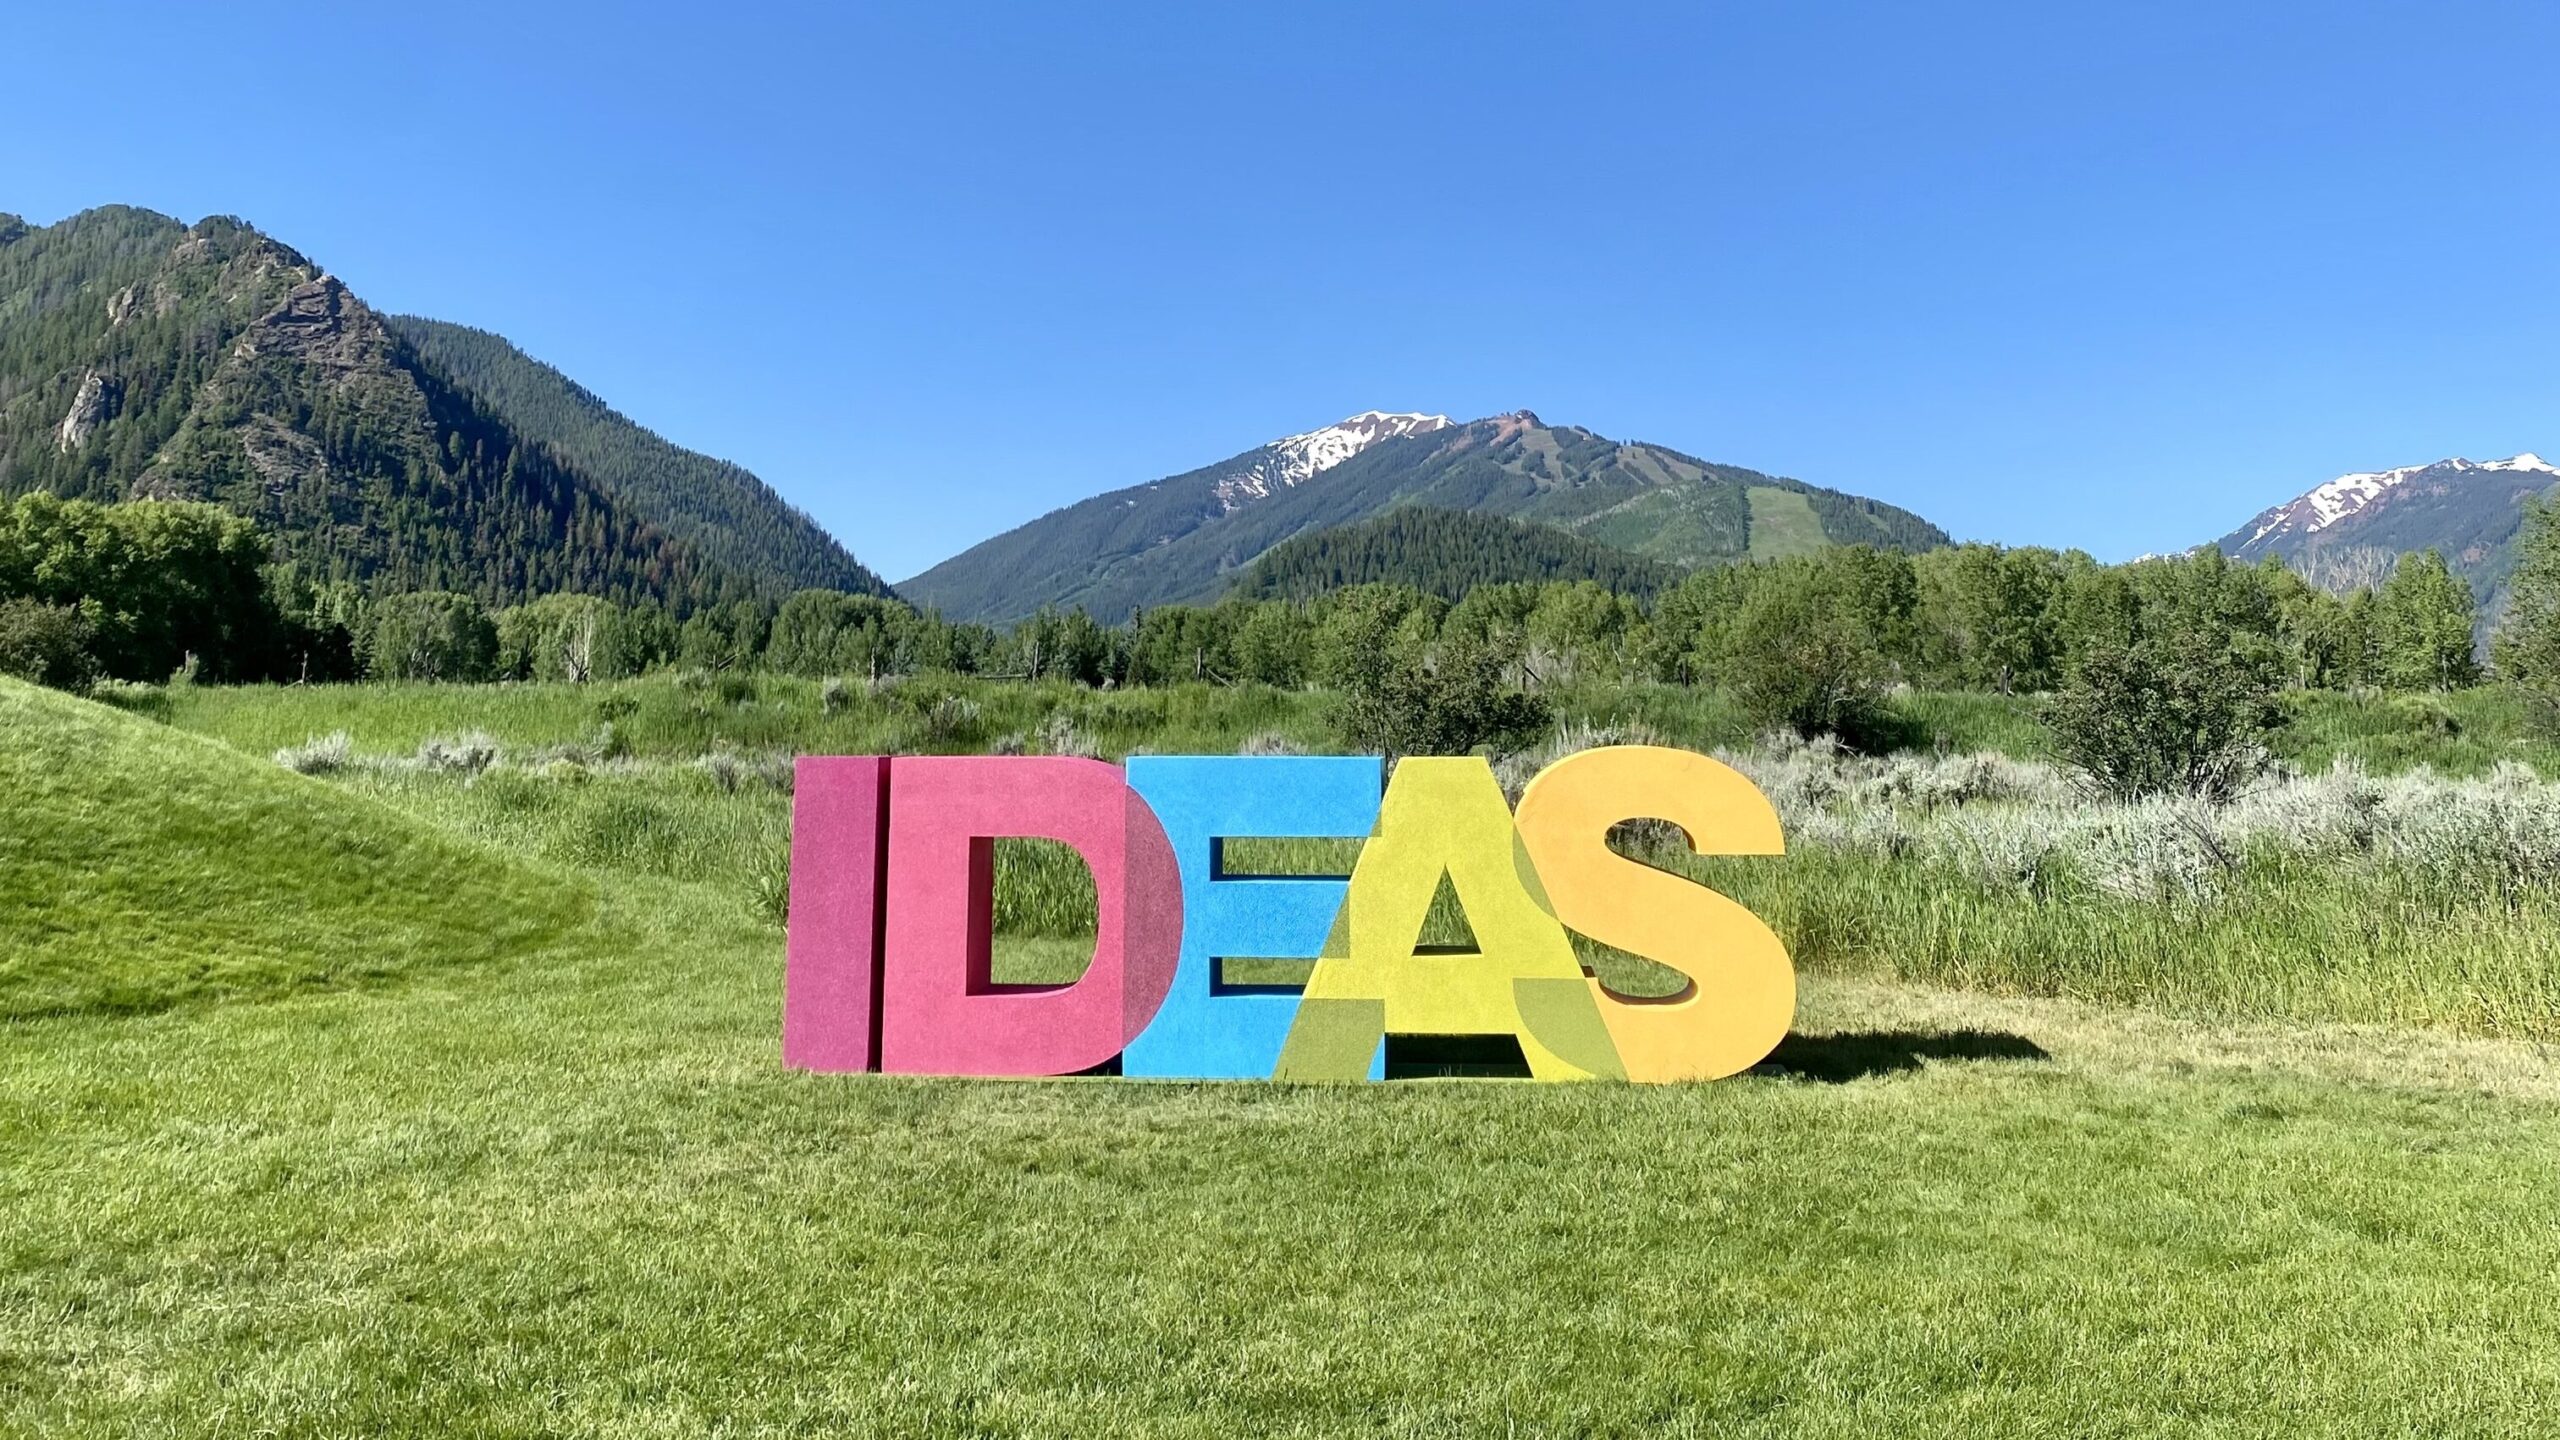 IDEAS text in a mountain setting